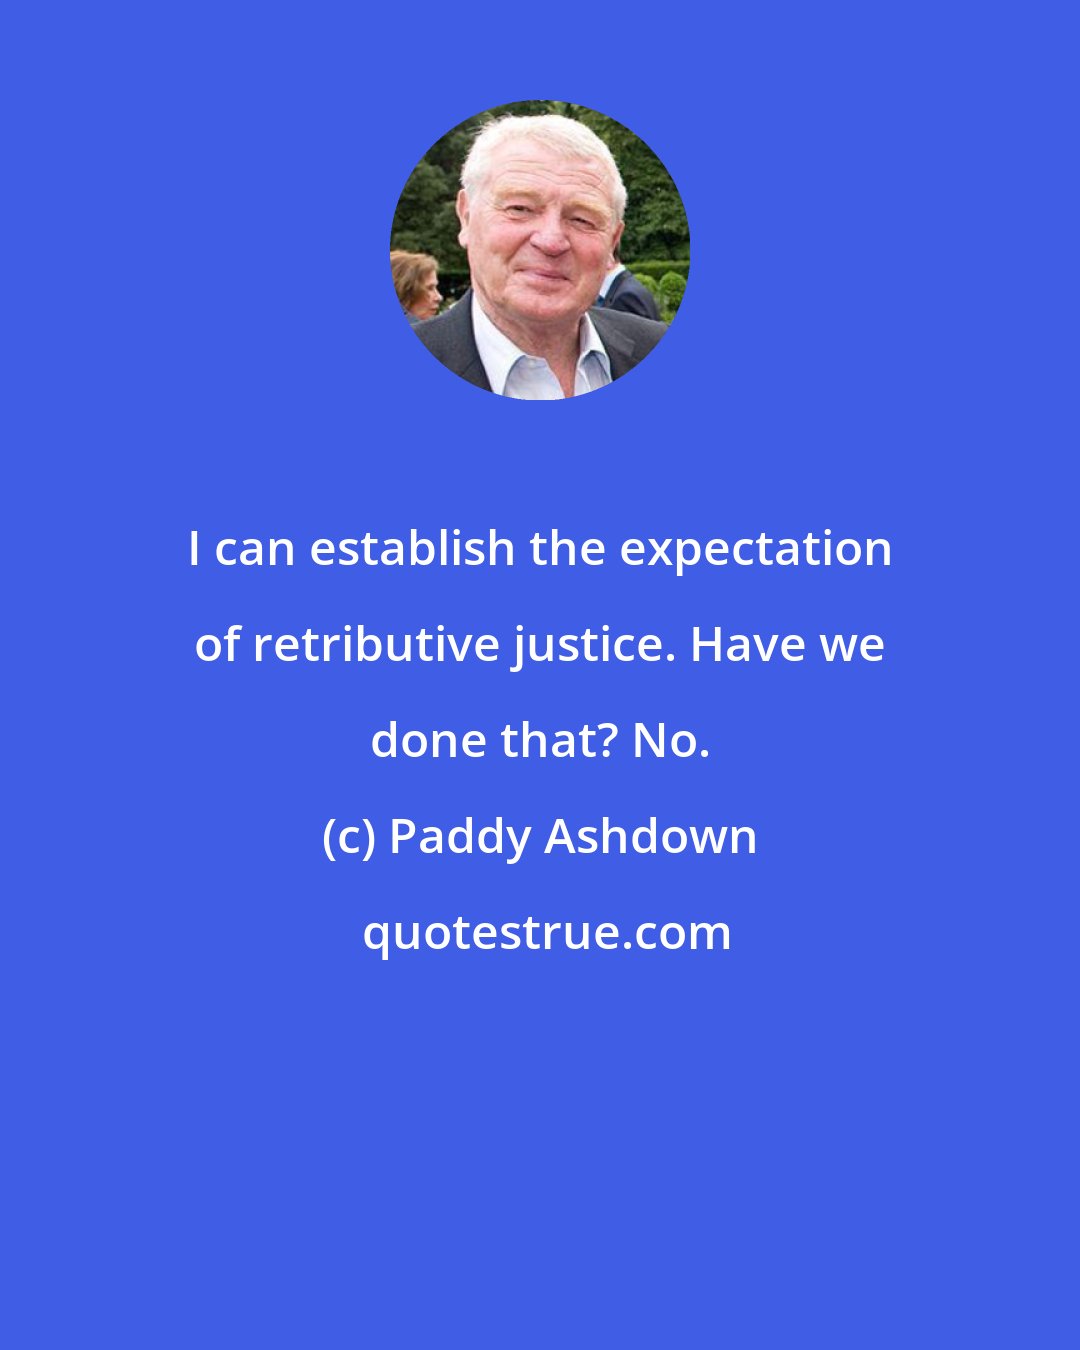 Paddy Ashdown: I can establish the expectation of retributive justice. Have we done that? No.